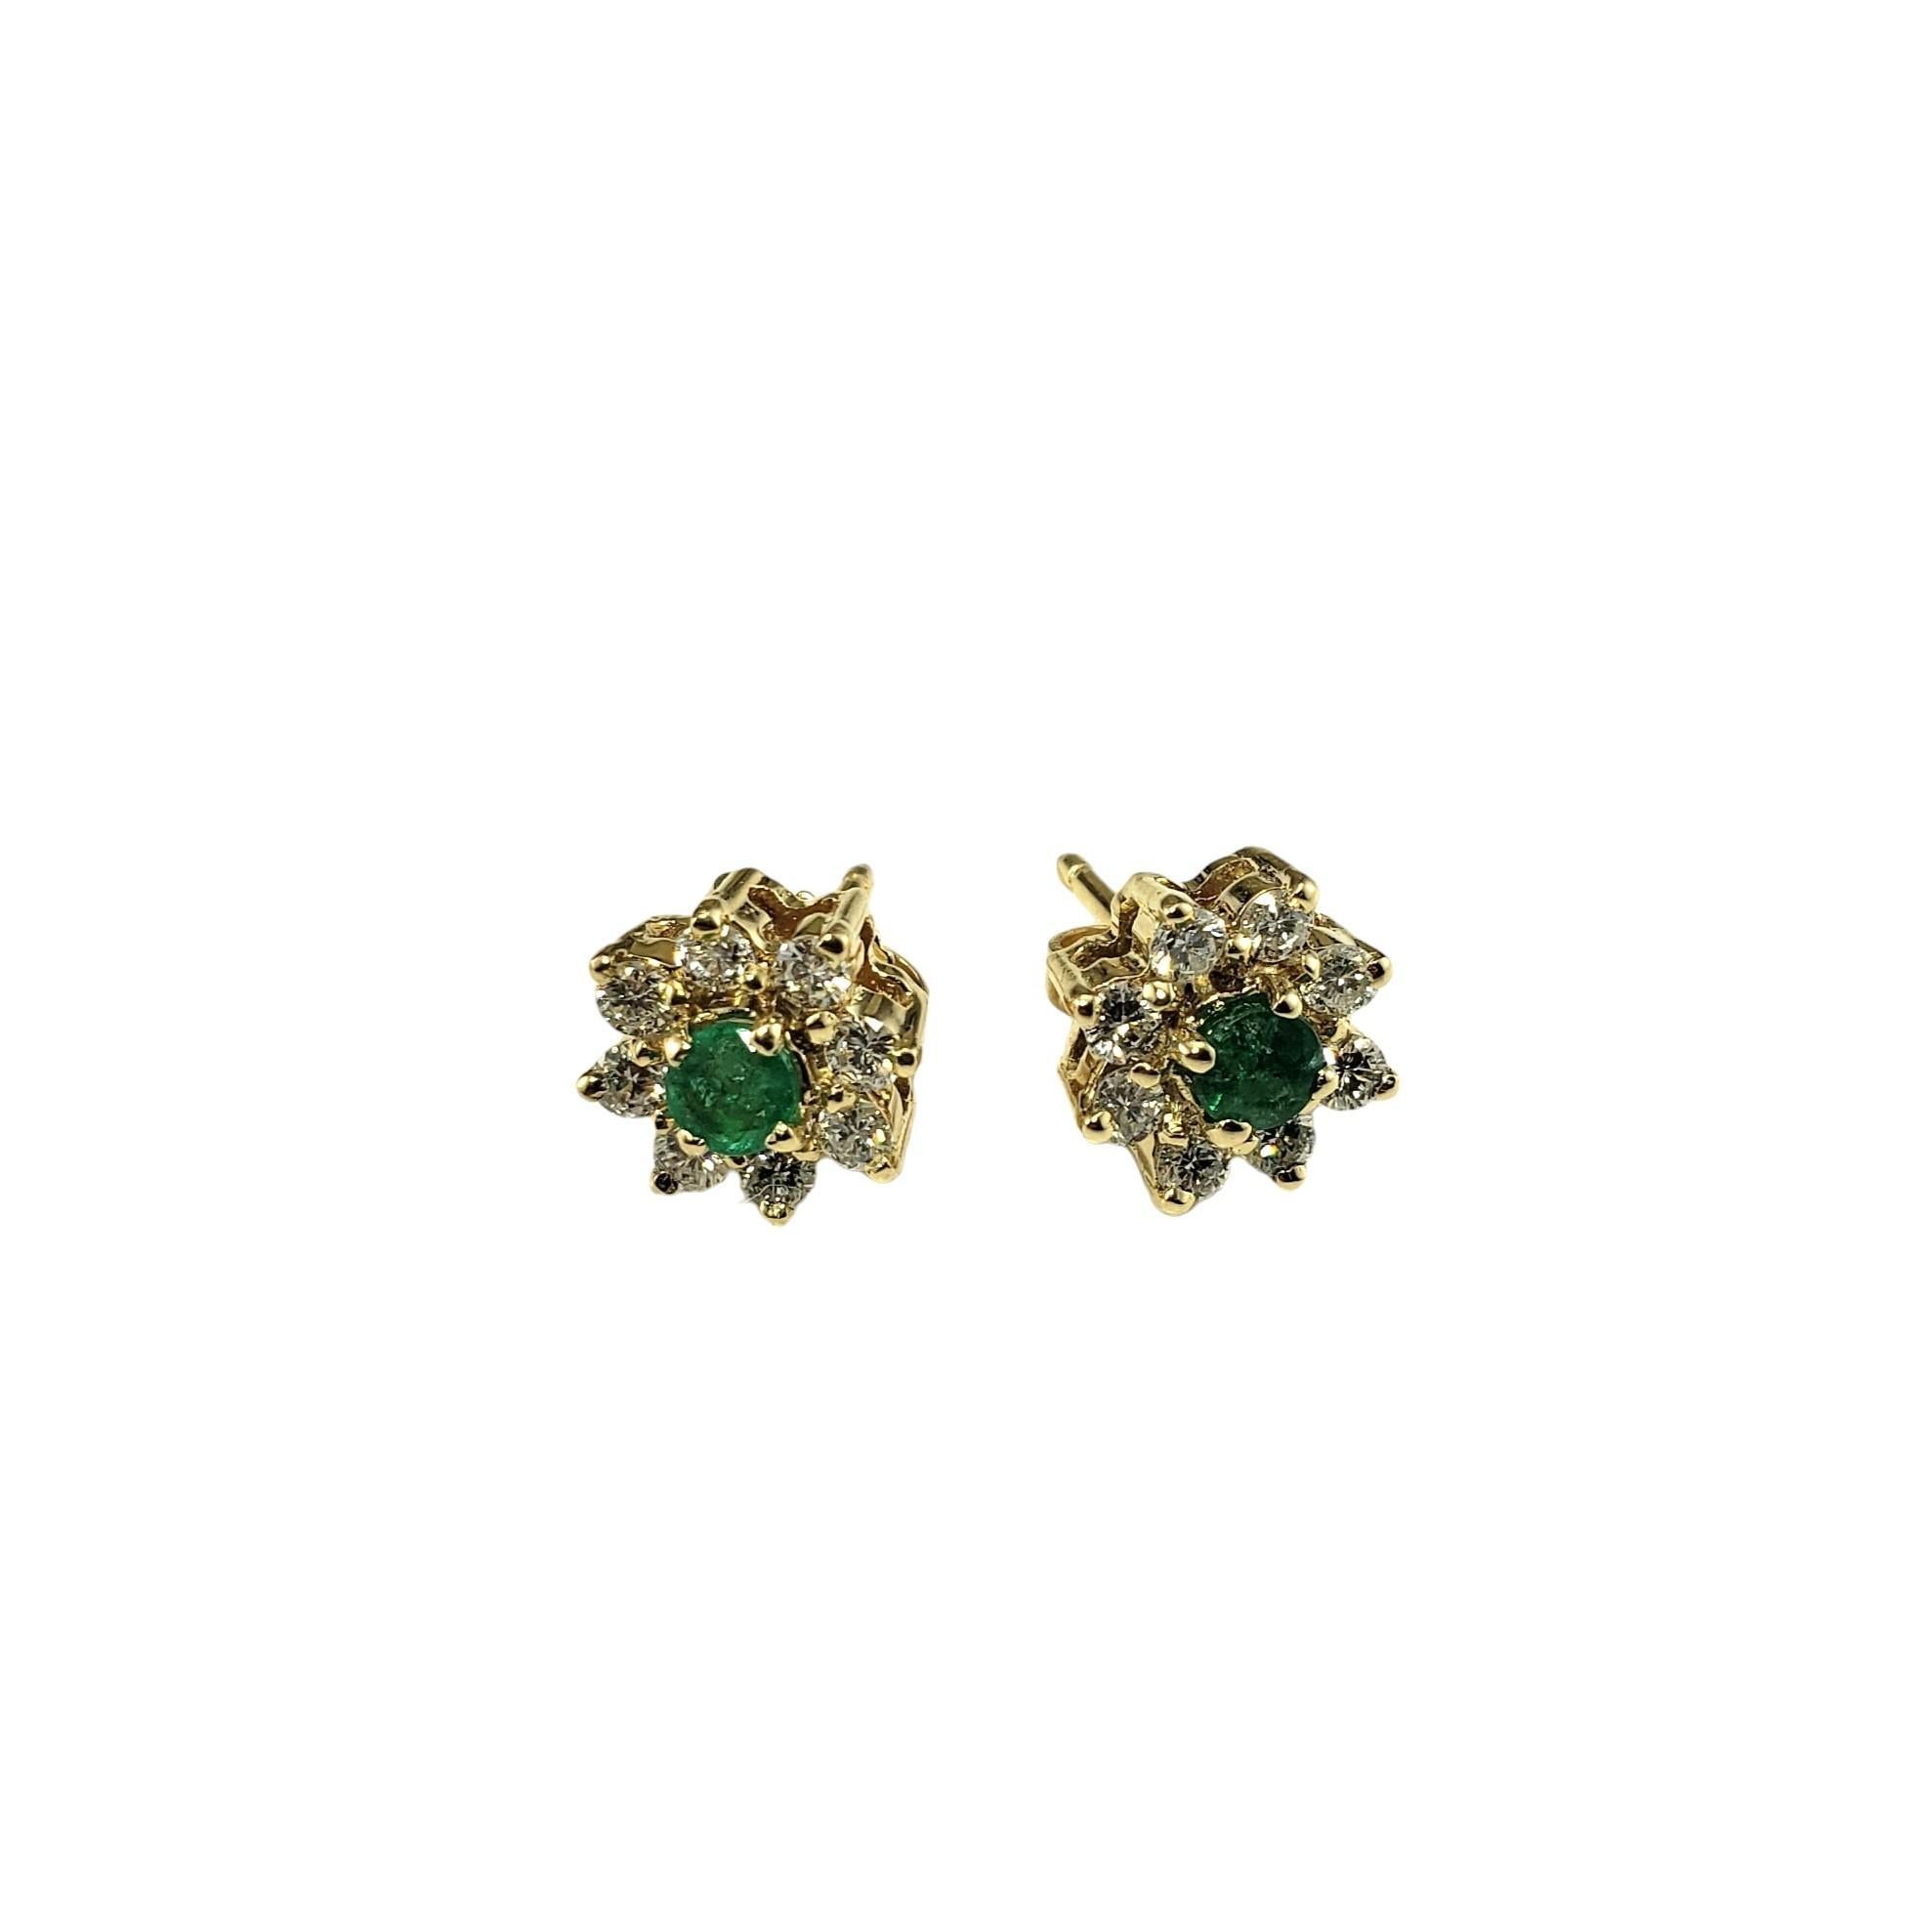 Vintage 14K Yellow Gold Emerald and Diamond Stud Earrings JAGi Certified-

These elegant stud earrings each feature one round emerald and eight round brilliant cut diamonds set in classic 14K yellow gold.  Push back closures.

Total emerald weight: